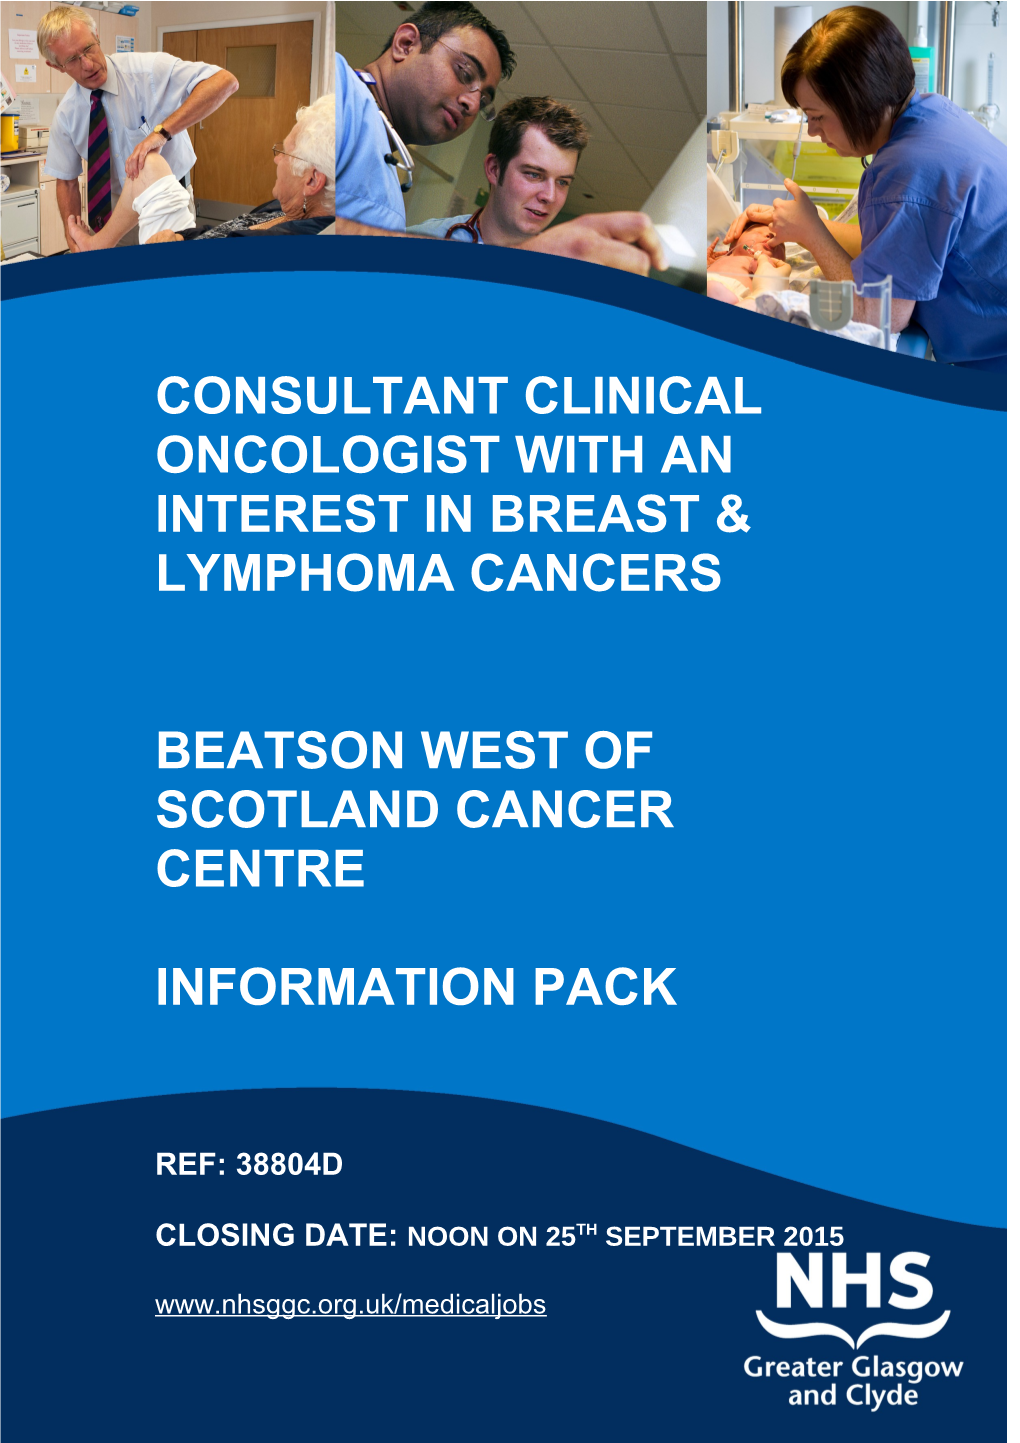 Consultant Clinical Oncologist with an Interest in Breast Lymphoma Cancers